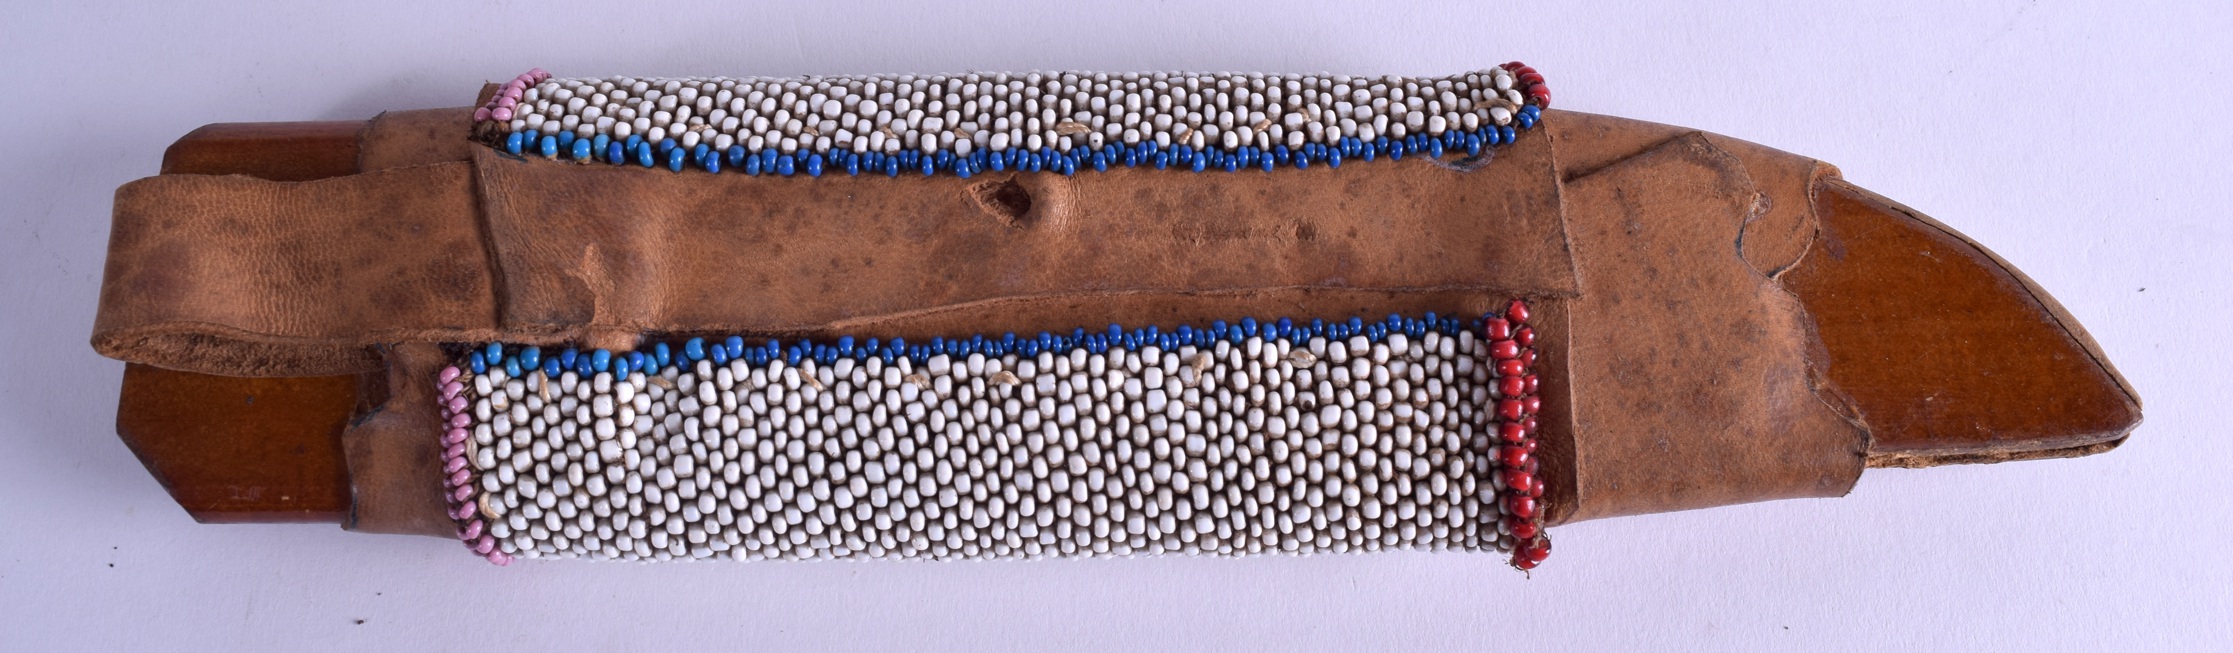 A NATIVE AMERICAN BEAD WORK KNIFE SCABBARD decorated with coloured triangular motifs. 28 cm long. - Image 2 of 2